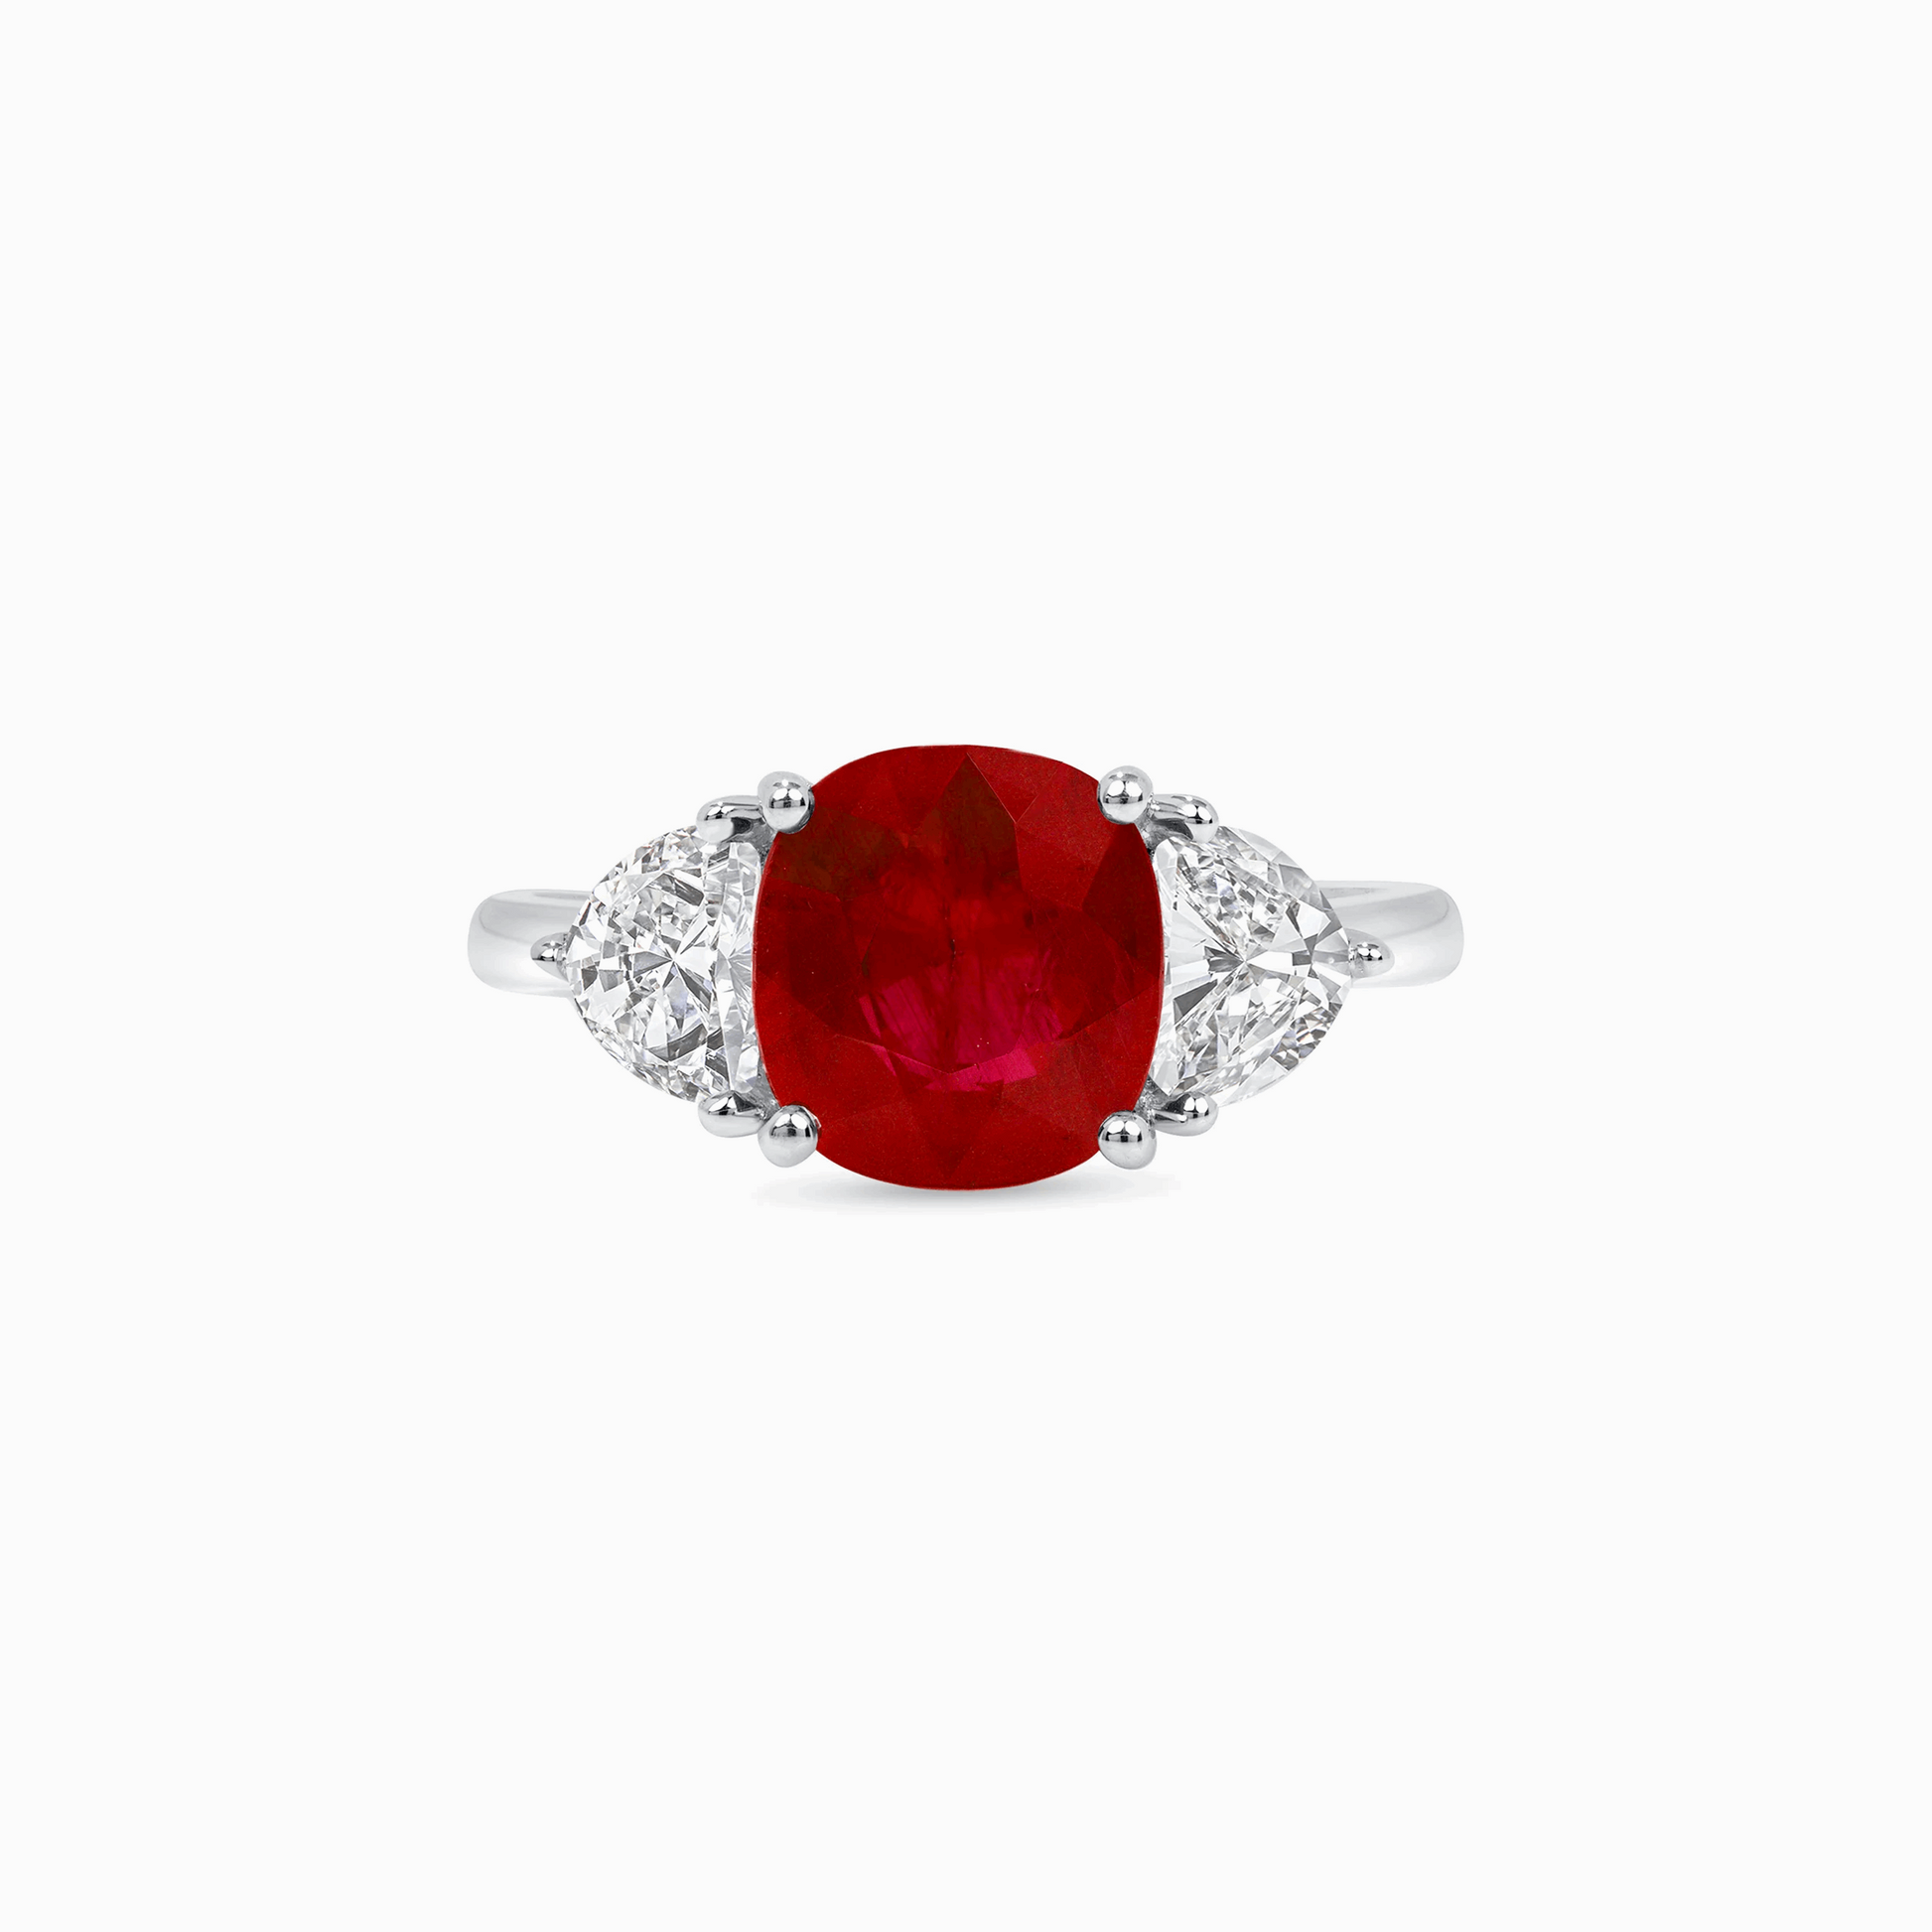 Greenland Ruby Diamond Platinum Ring on a white background